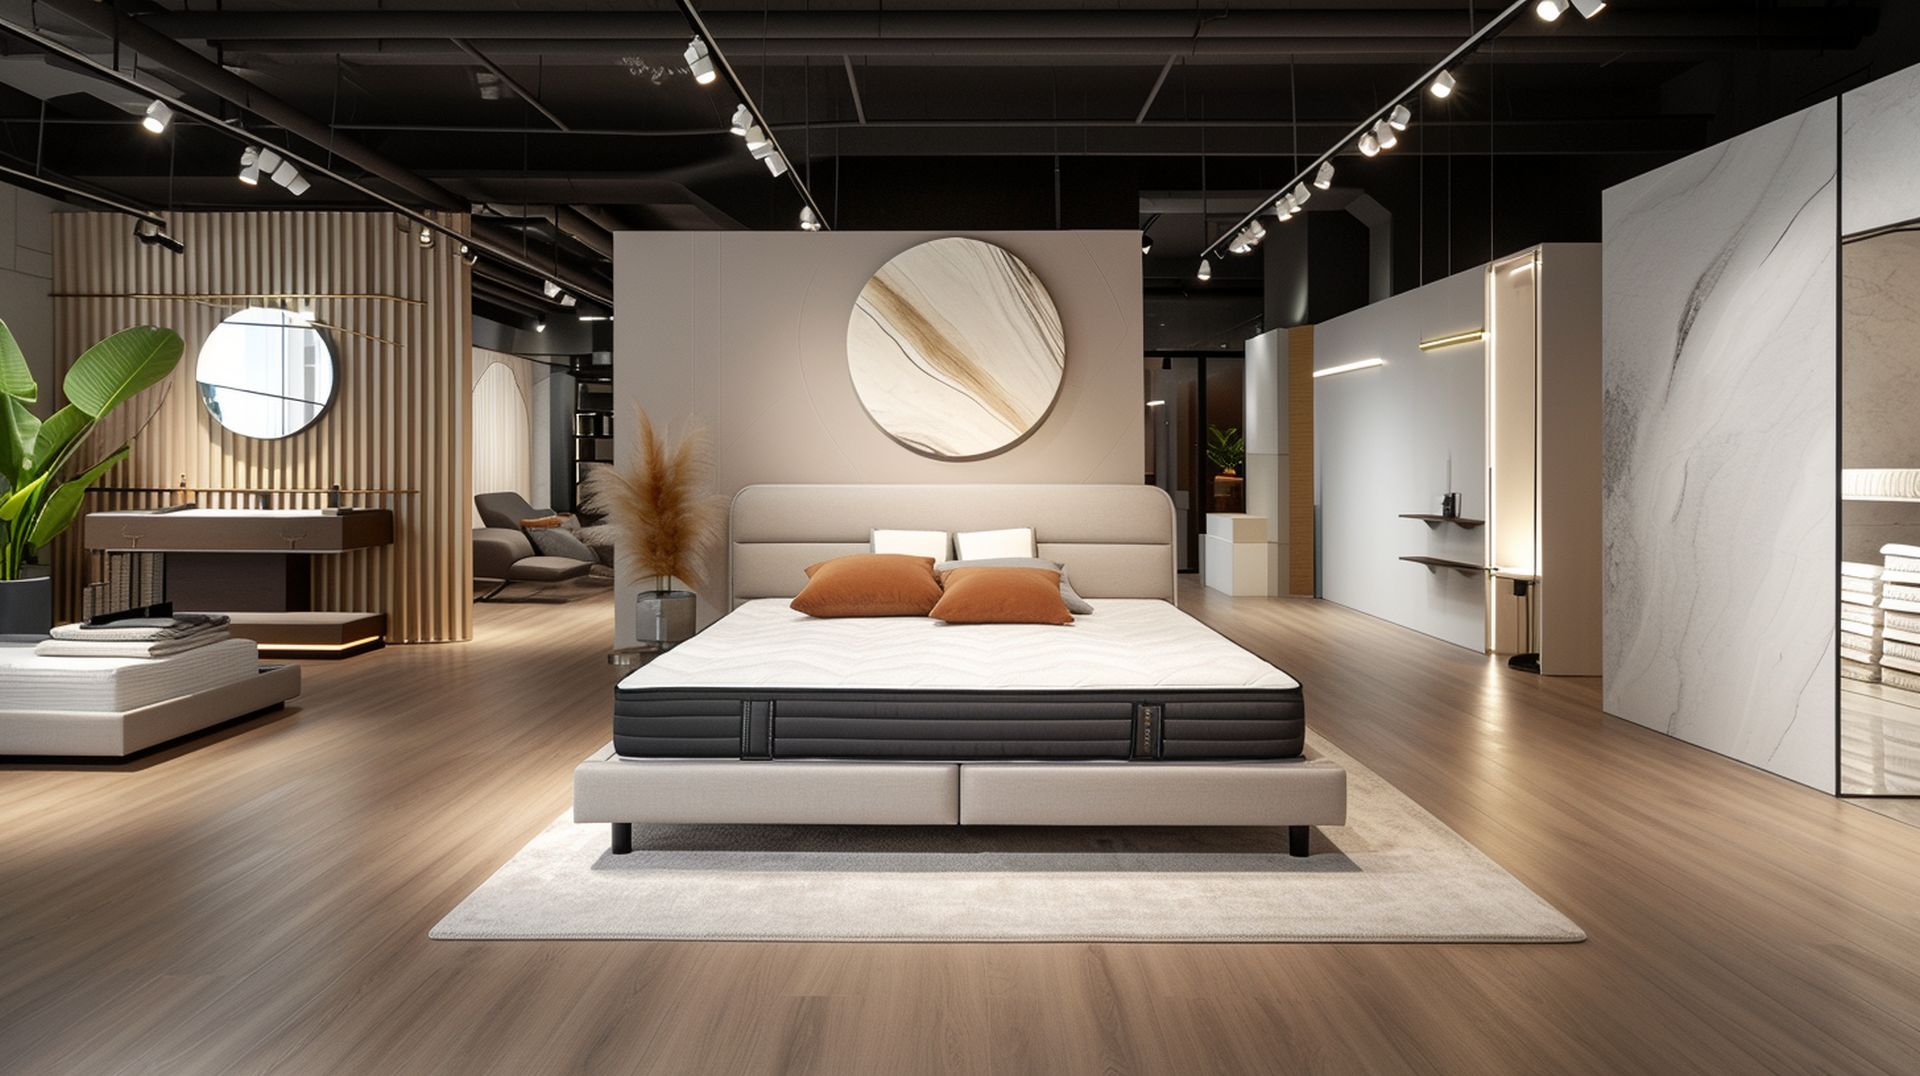 If you're looking for a new bed, mattress stores in Hampton offer the best customer and delivery service, financing, and warranties in Virginia